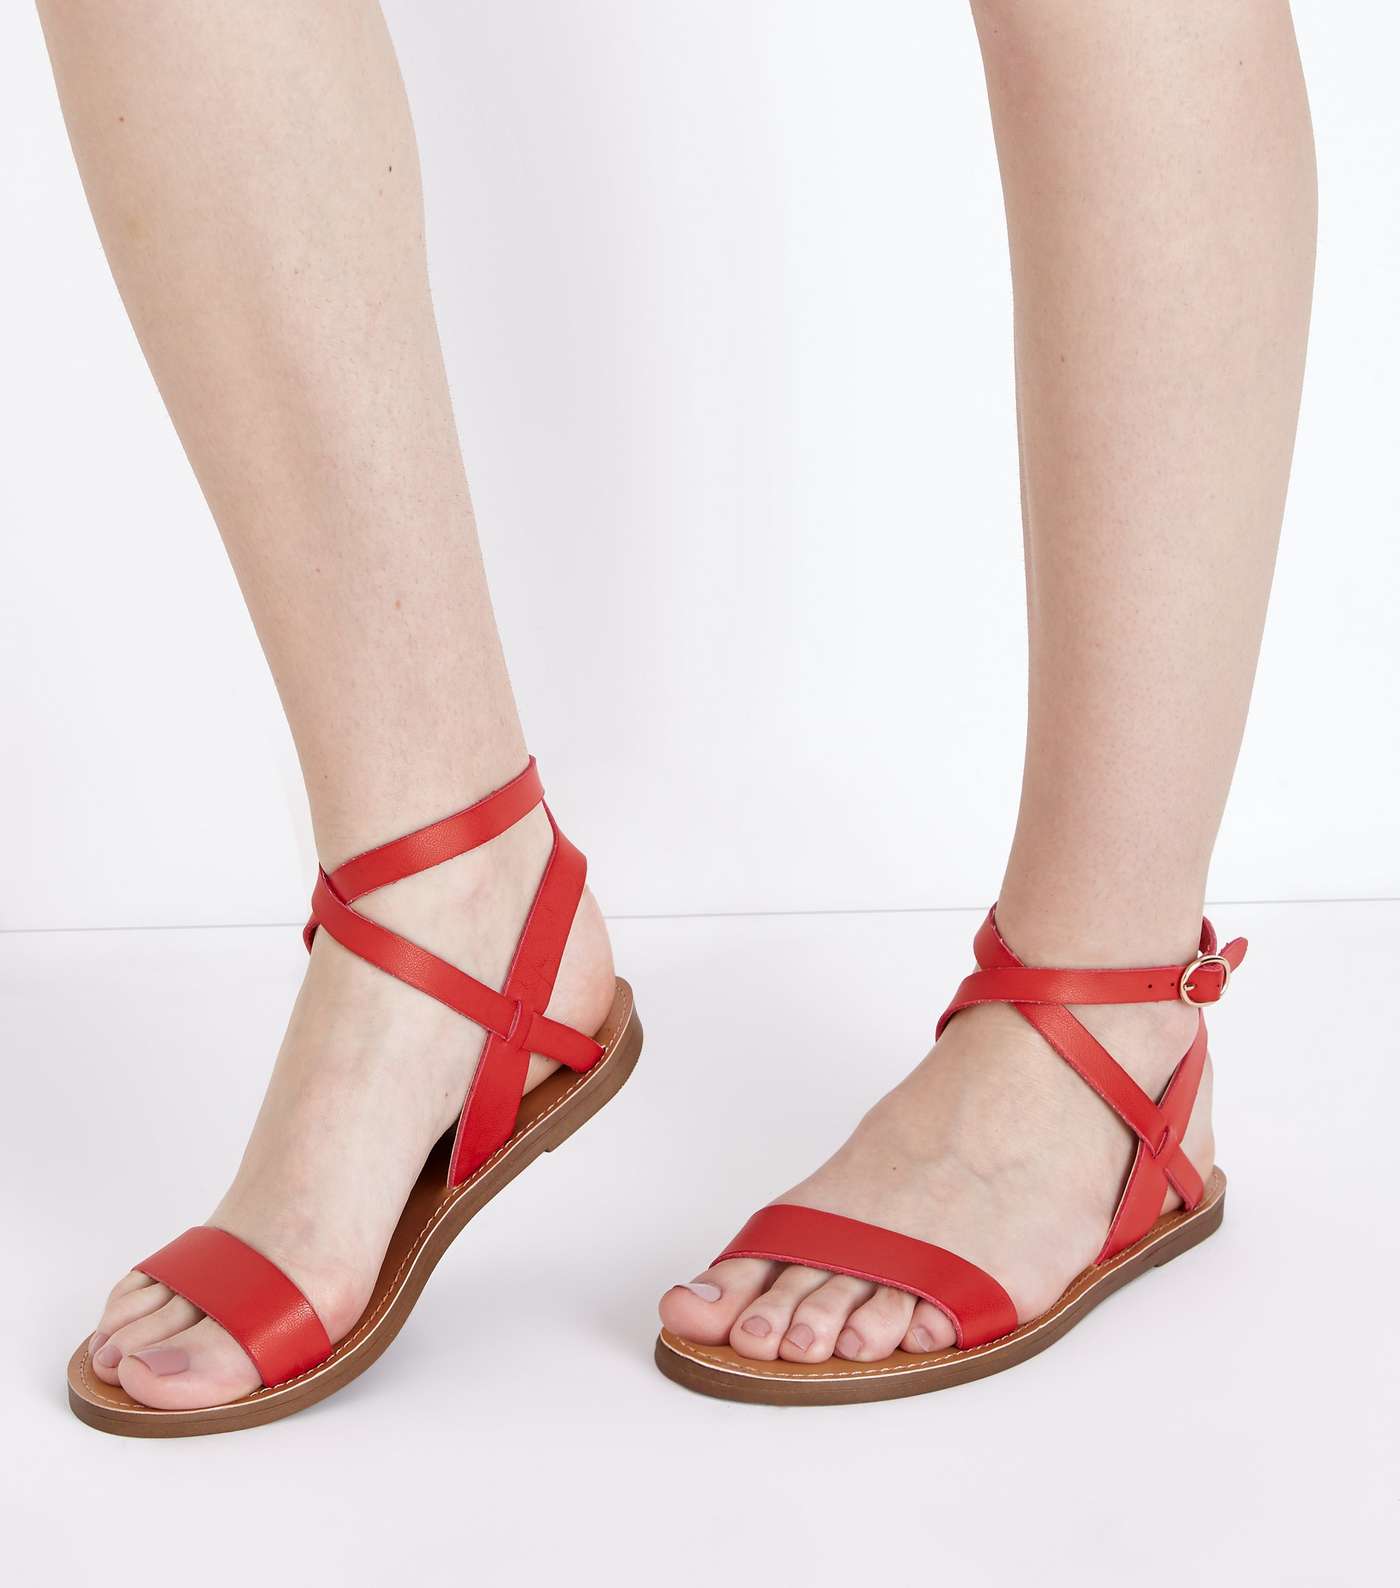 Red Ankle Cross Strap Sandals Image 2